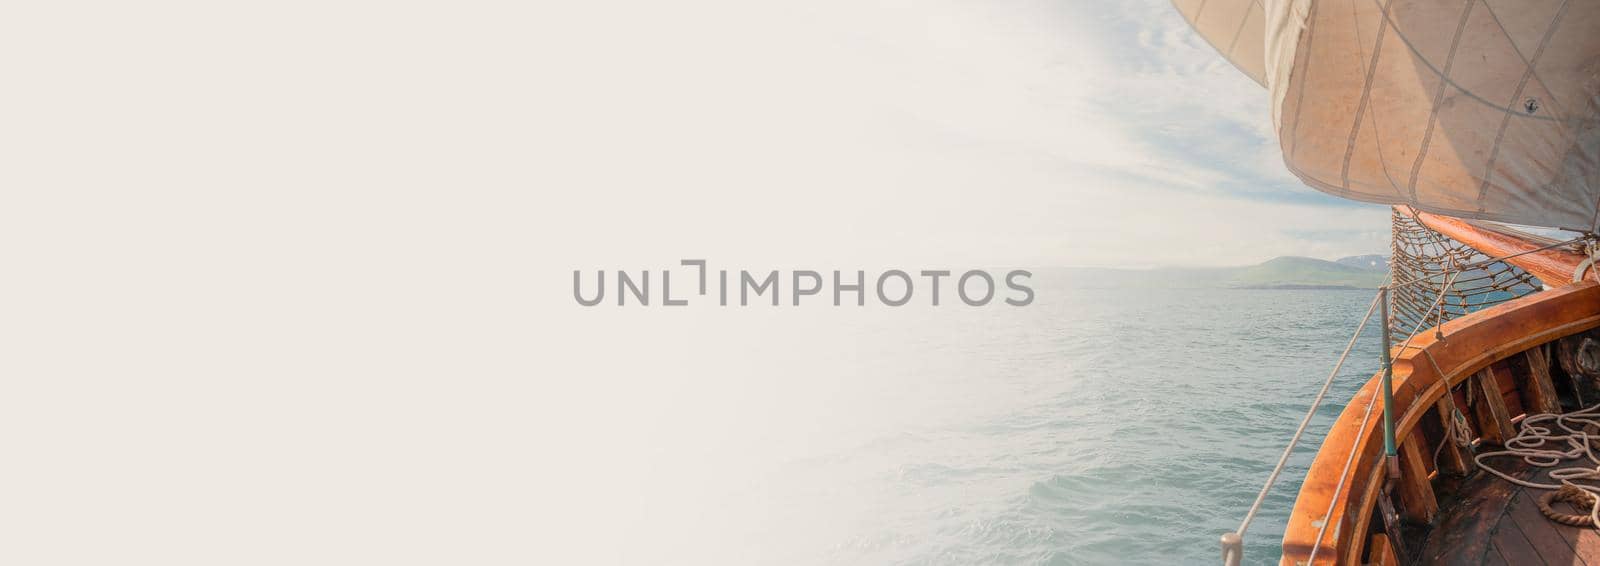 Banner with an old sailing boat towards dreams and adventures, with copy space for text. Concept travel, freedom and adventure, nomadic lifestyle. by neurobite